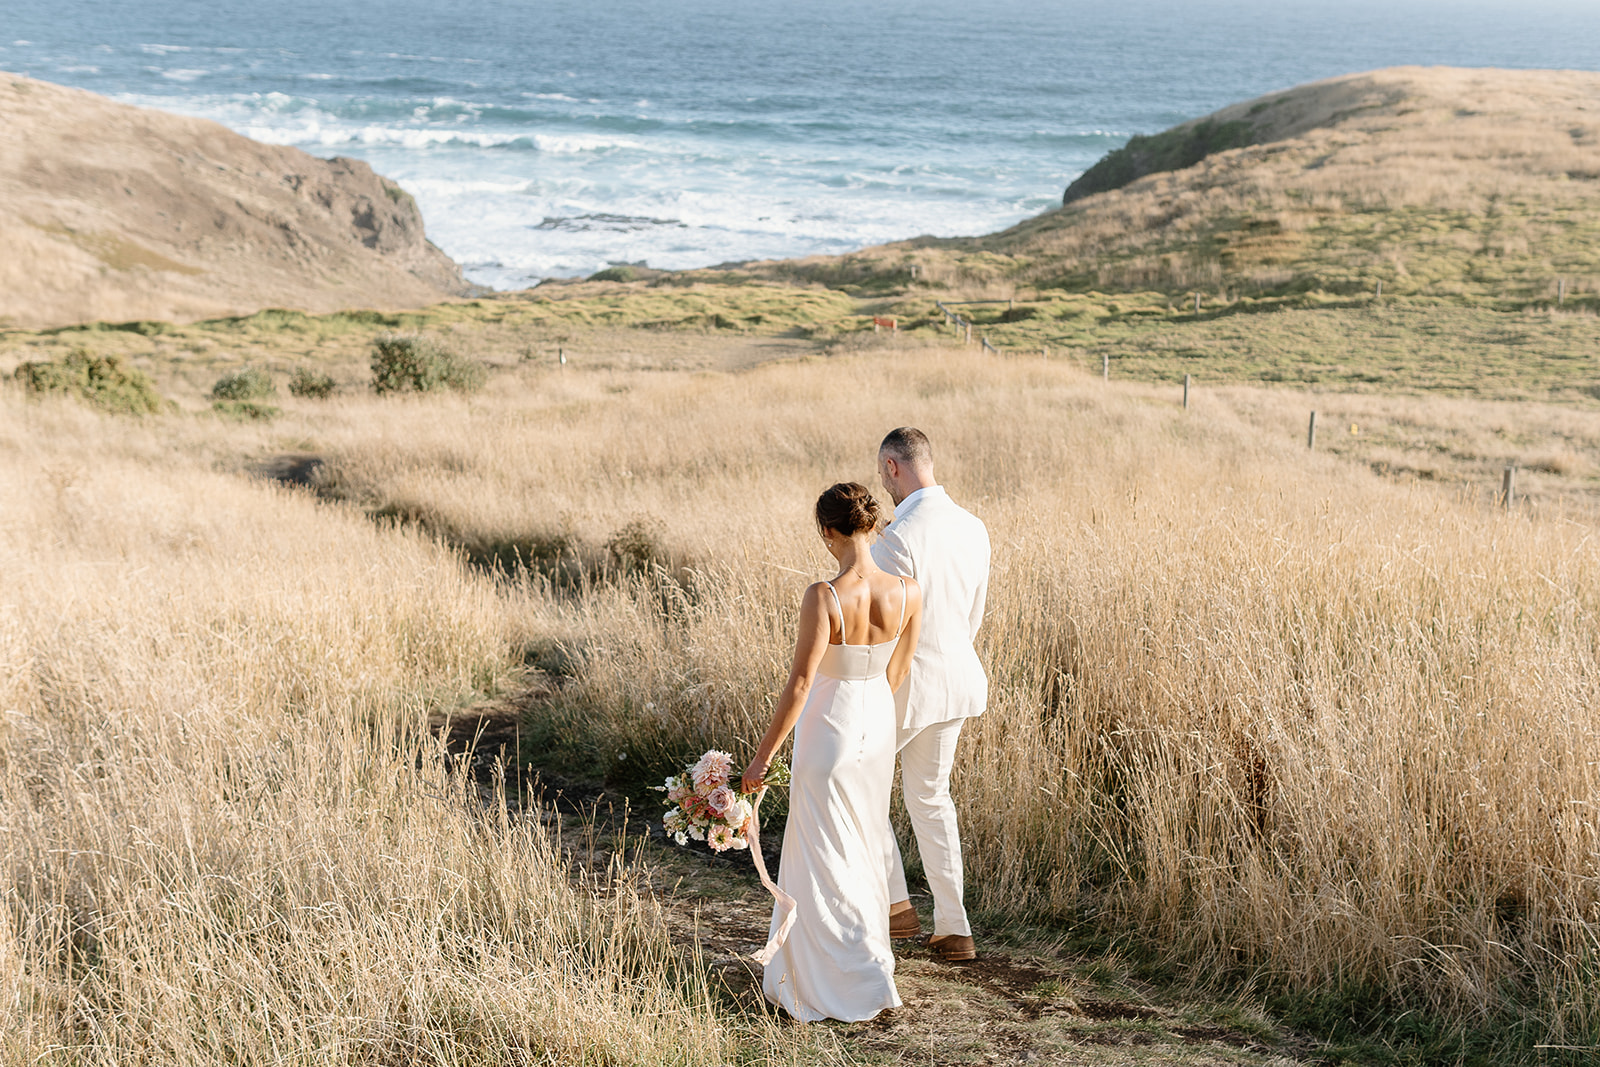 How to choose your elopement location